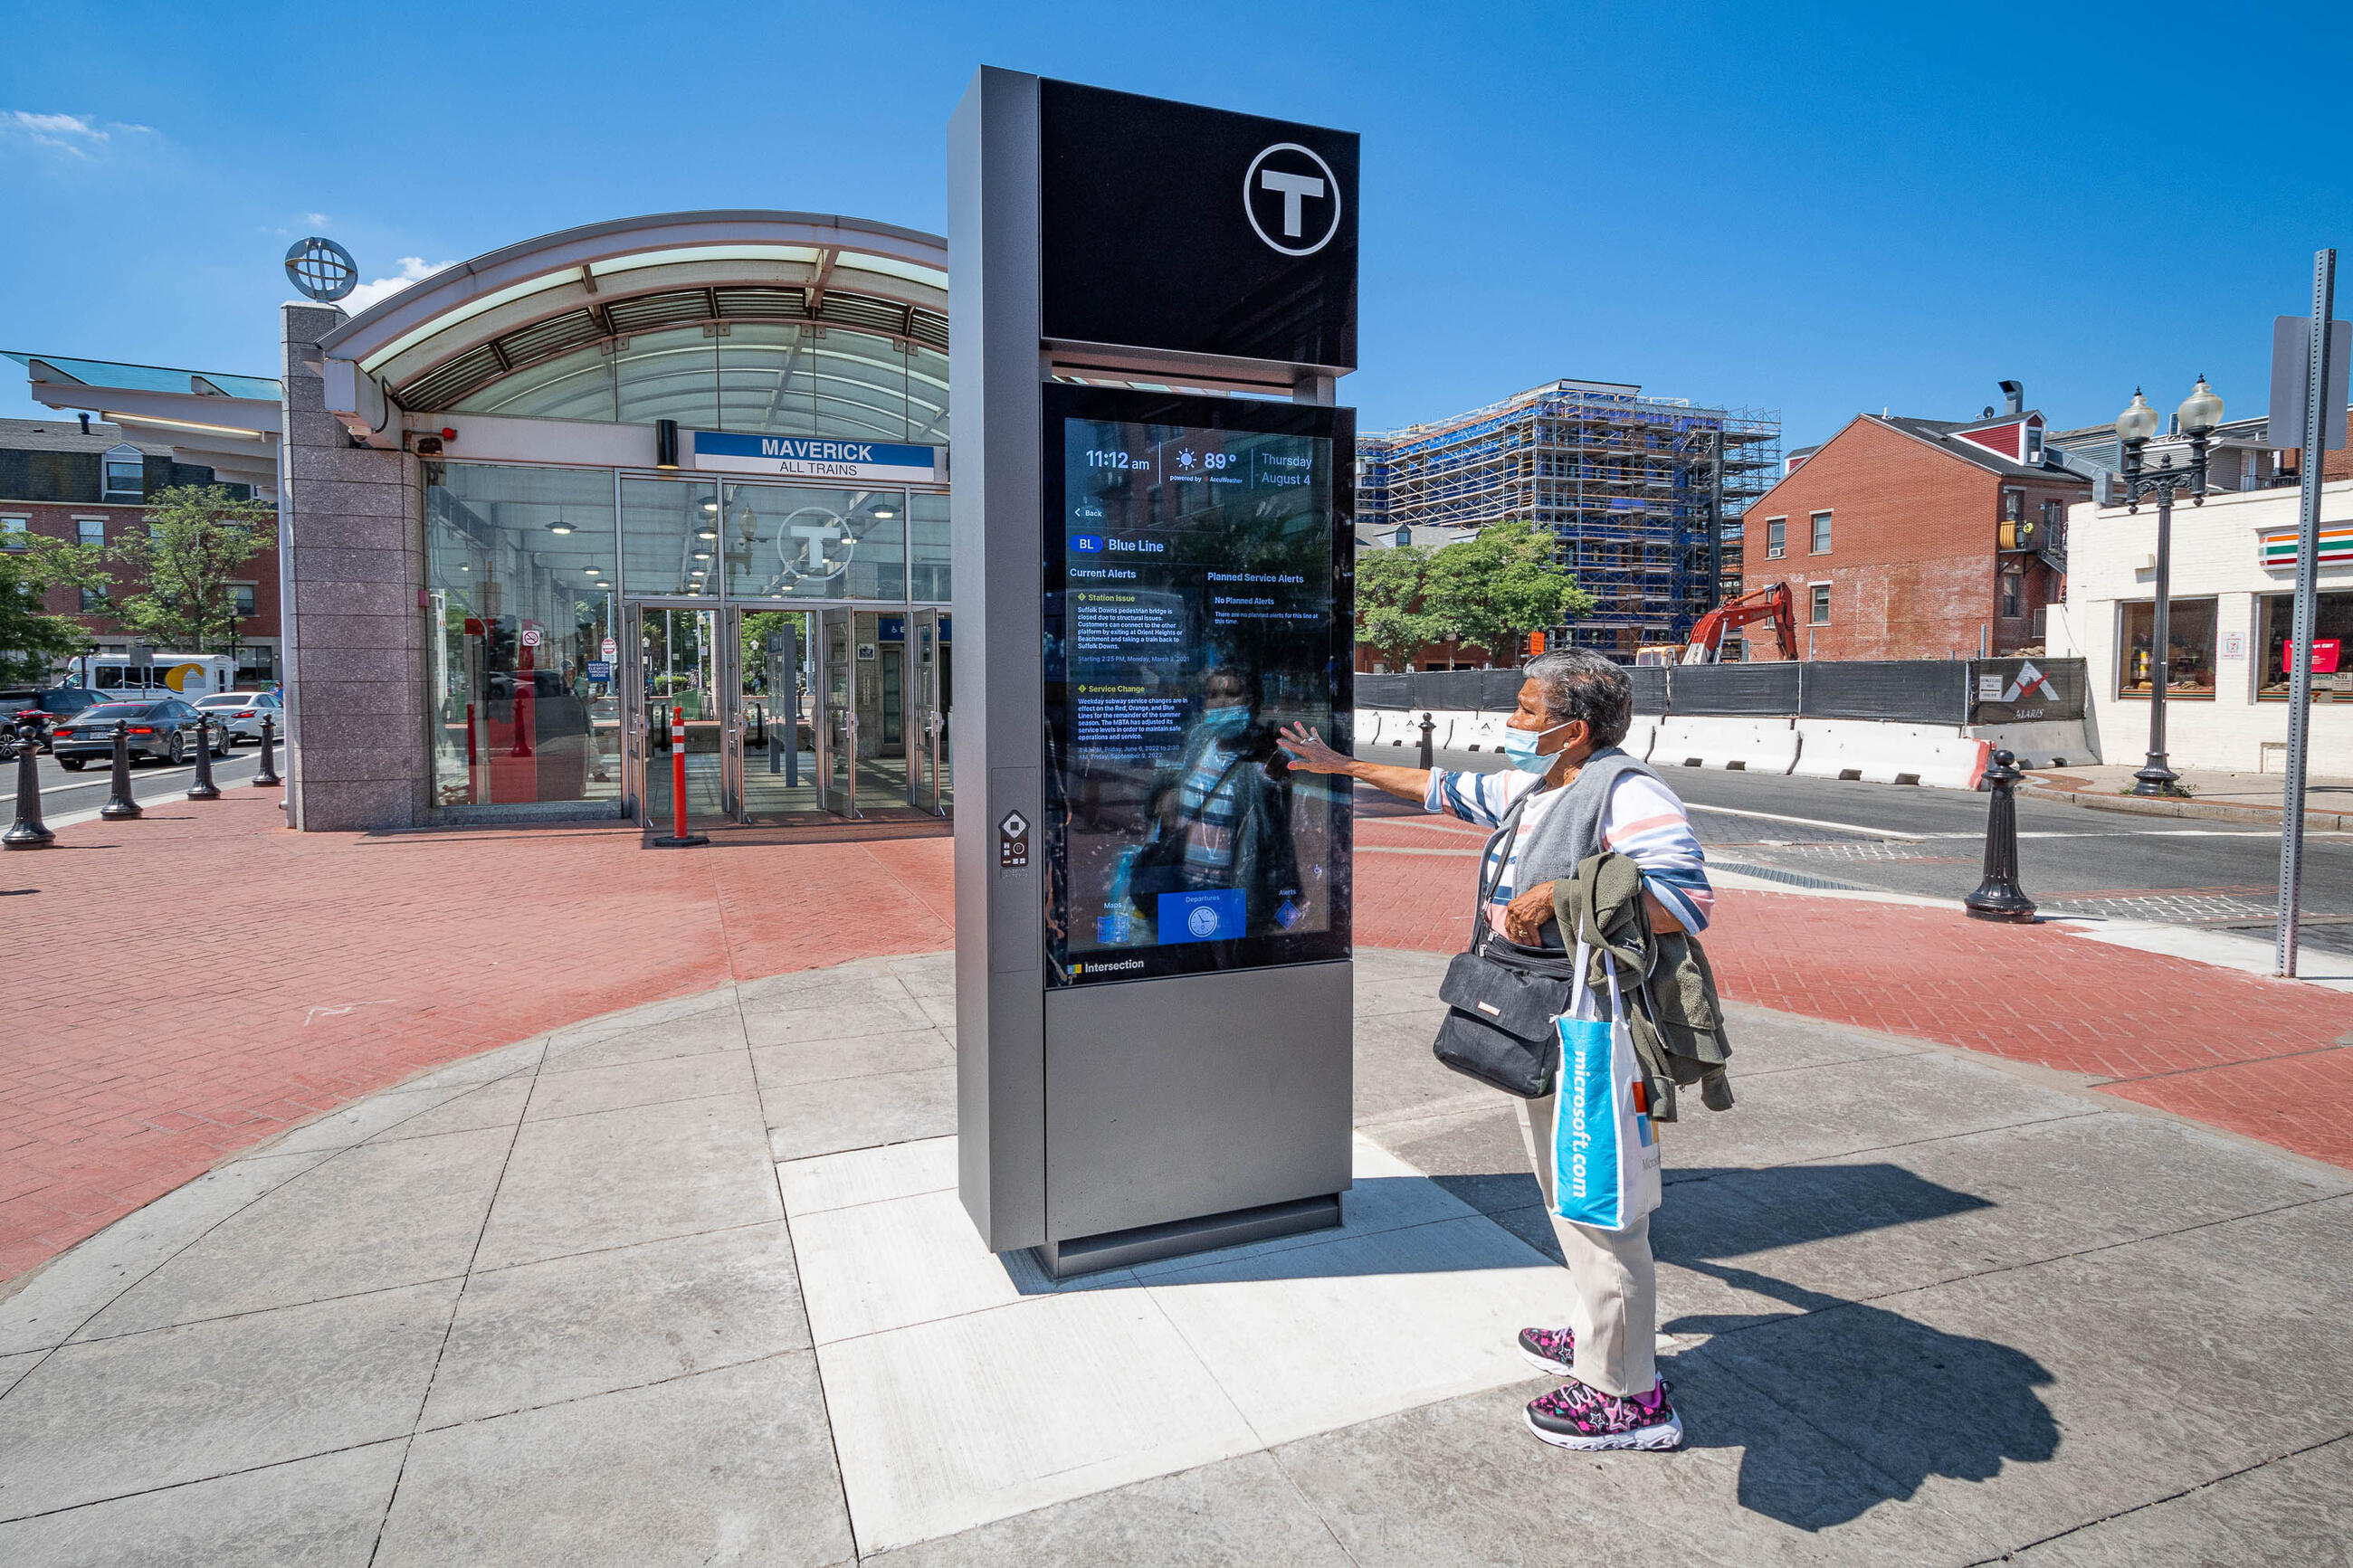 The first digital information kiosk was launched at Maverick station in June.